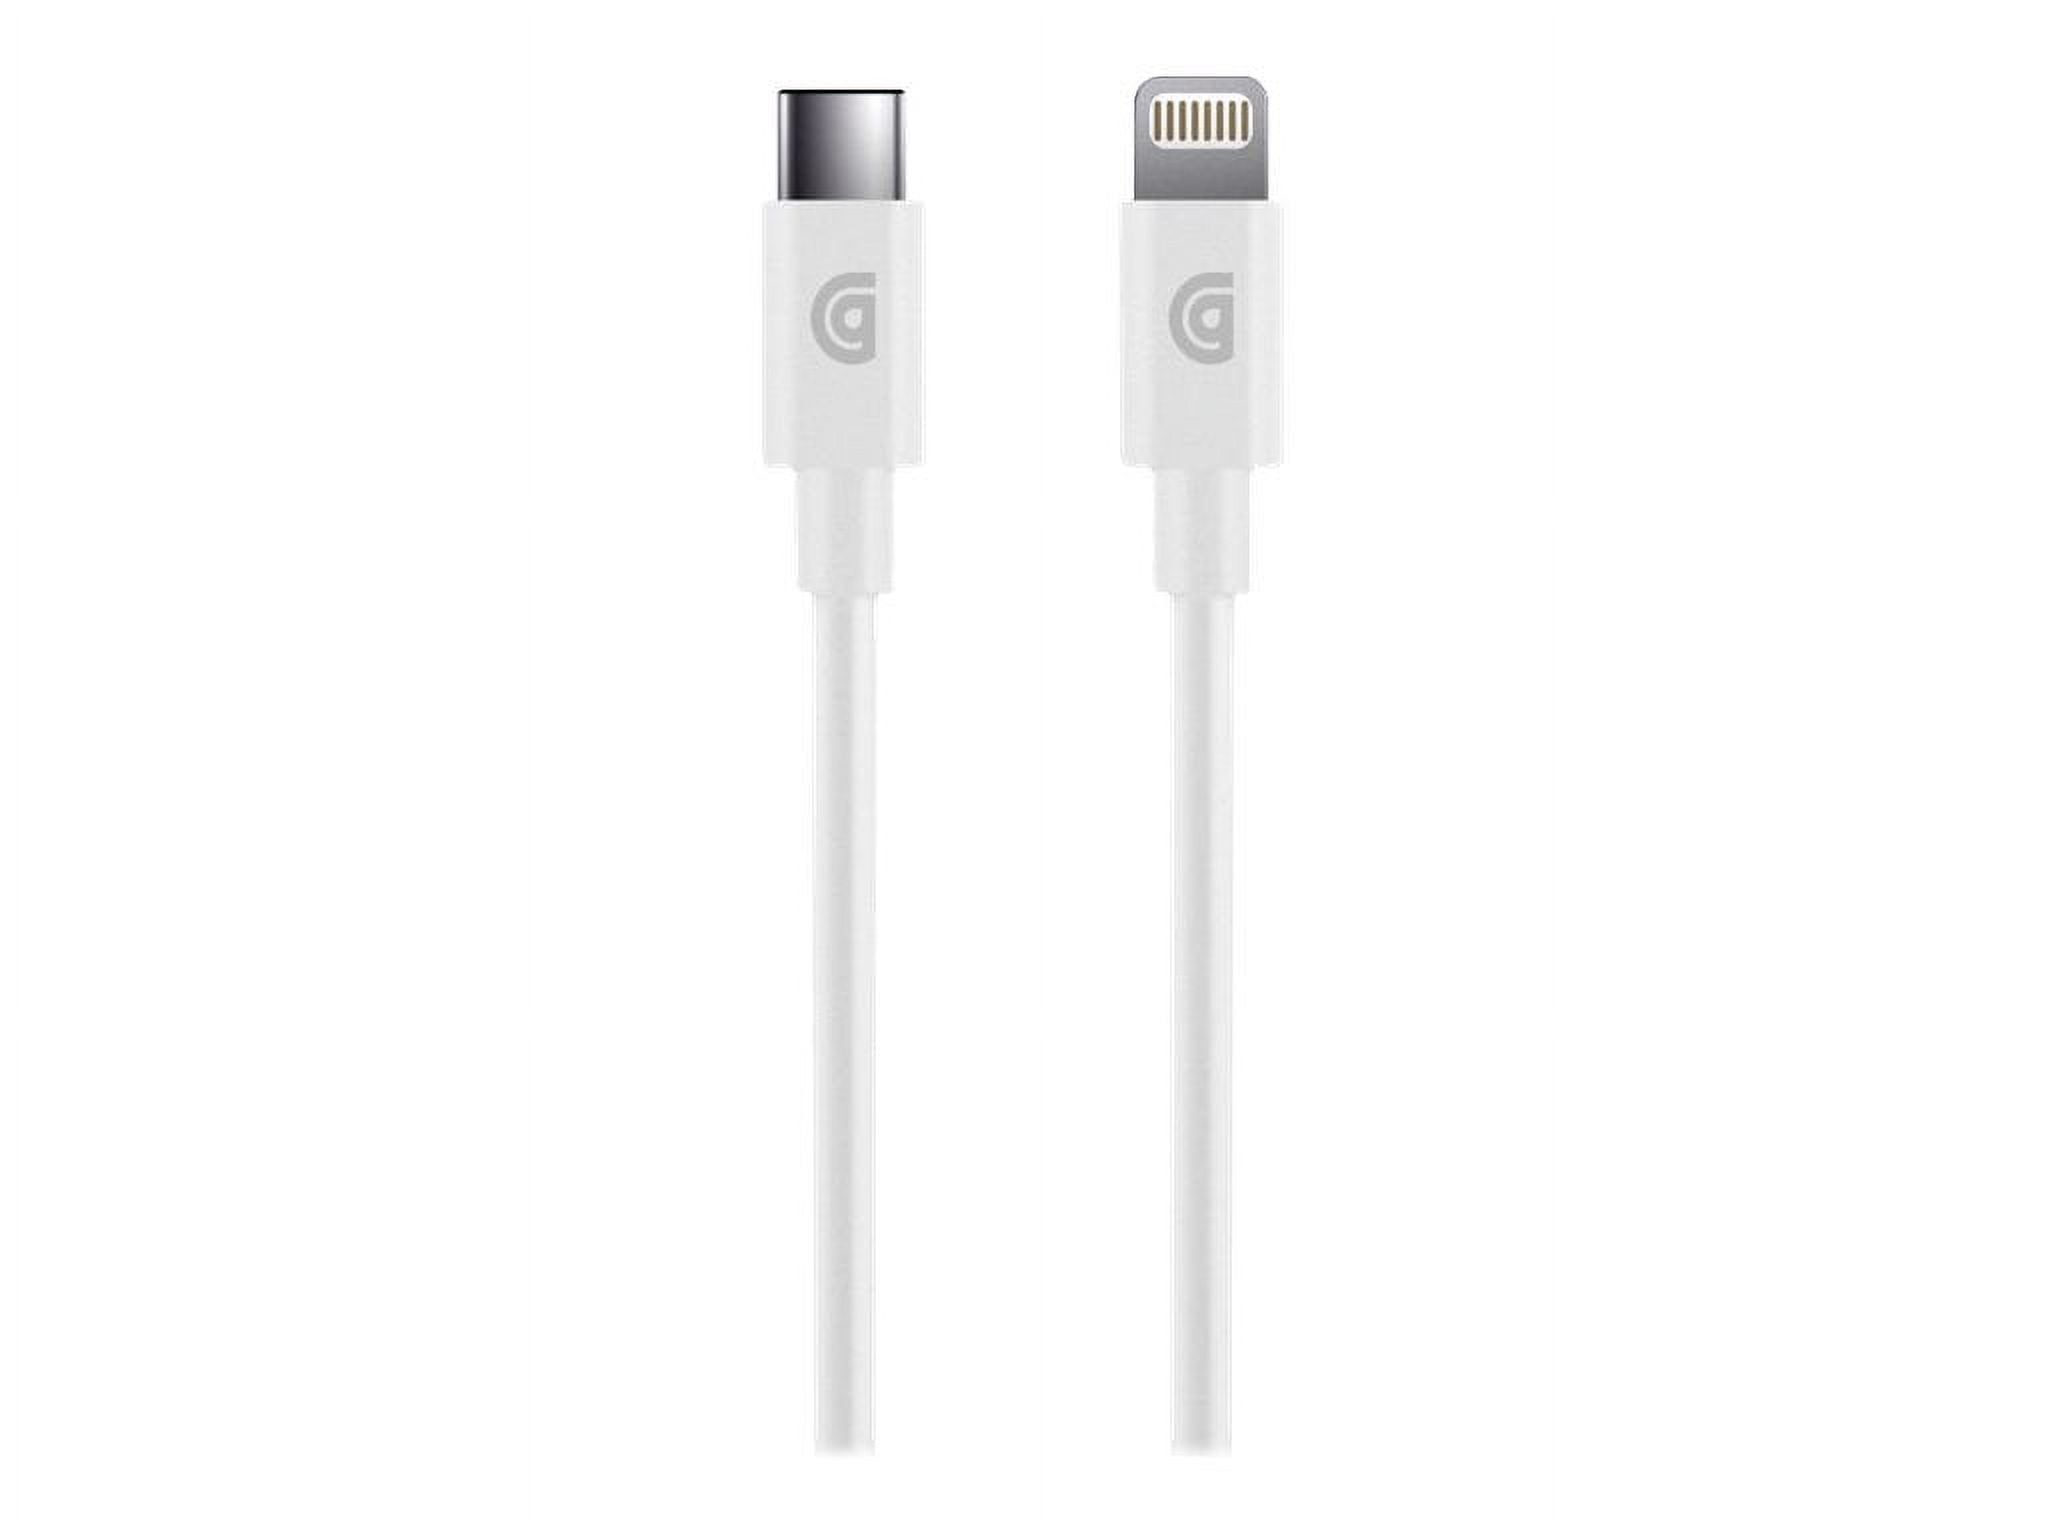 USB-C to Lightning Cable - 4ft/3.3m, USB-PD